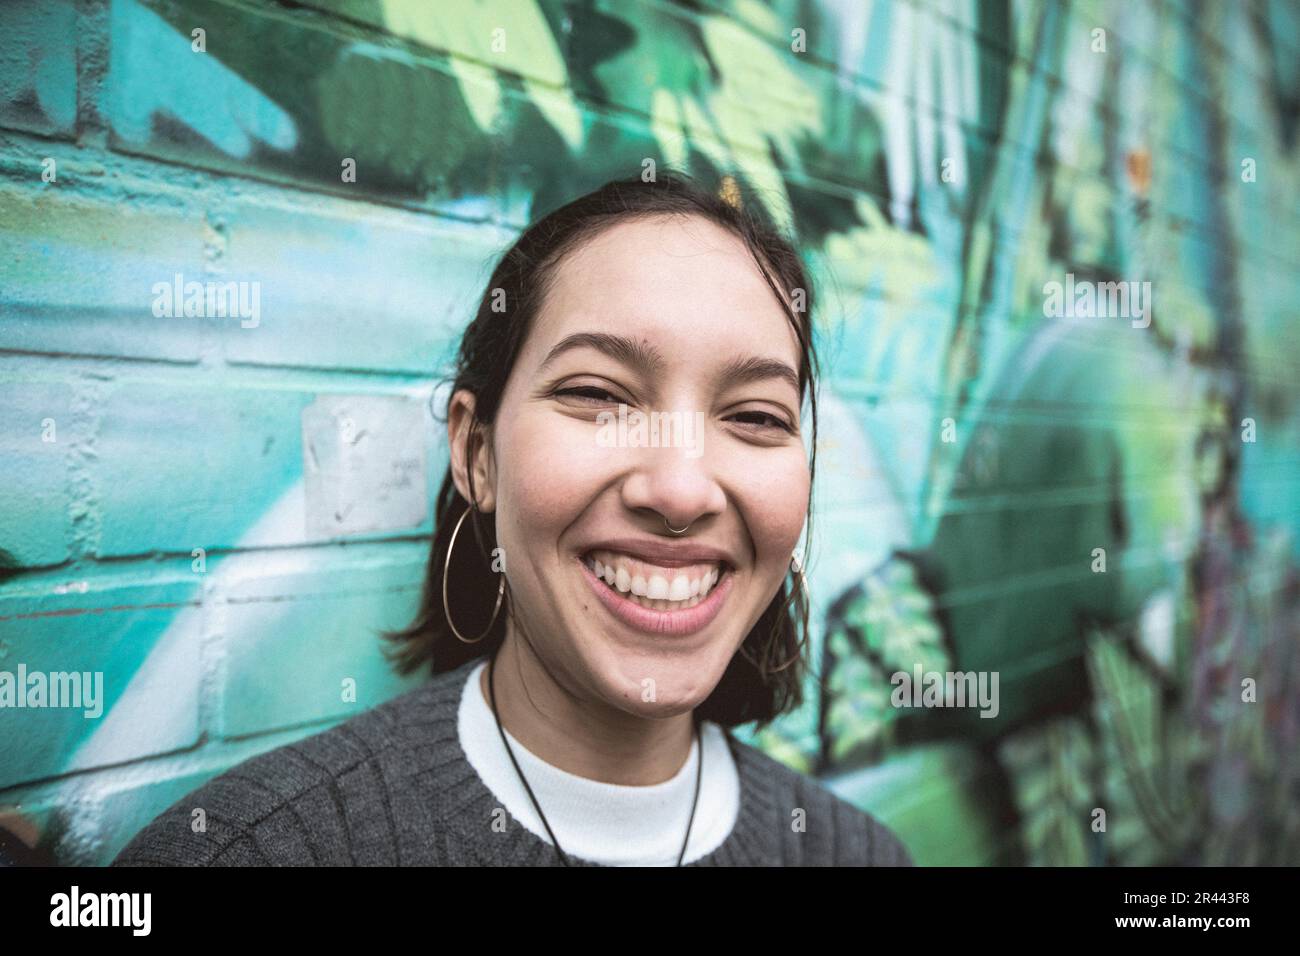 Multi ethnic woman with  toothy smile. Stock Photo